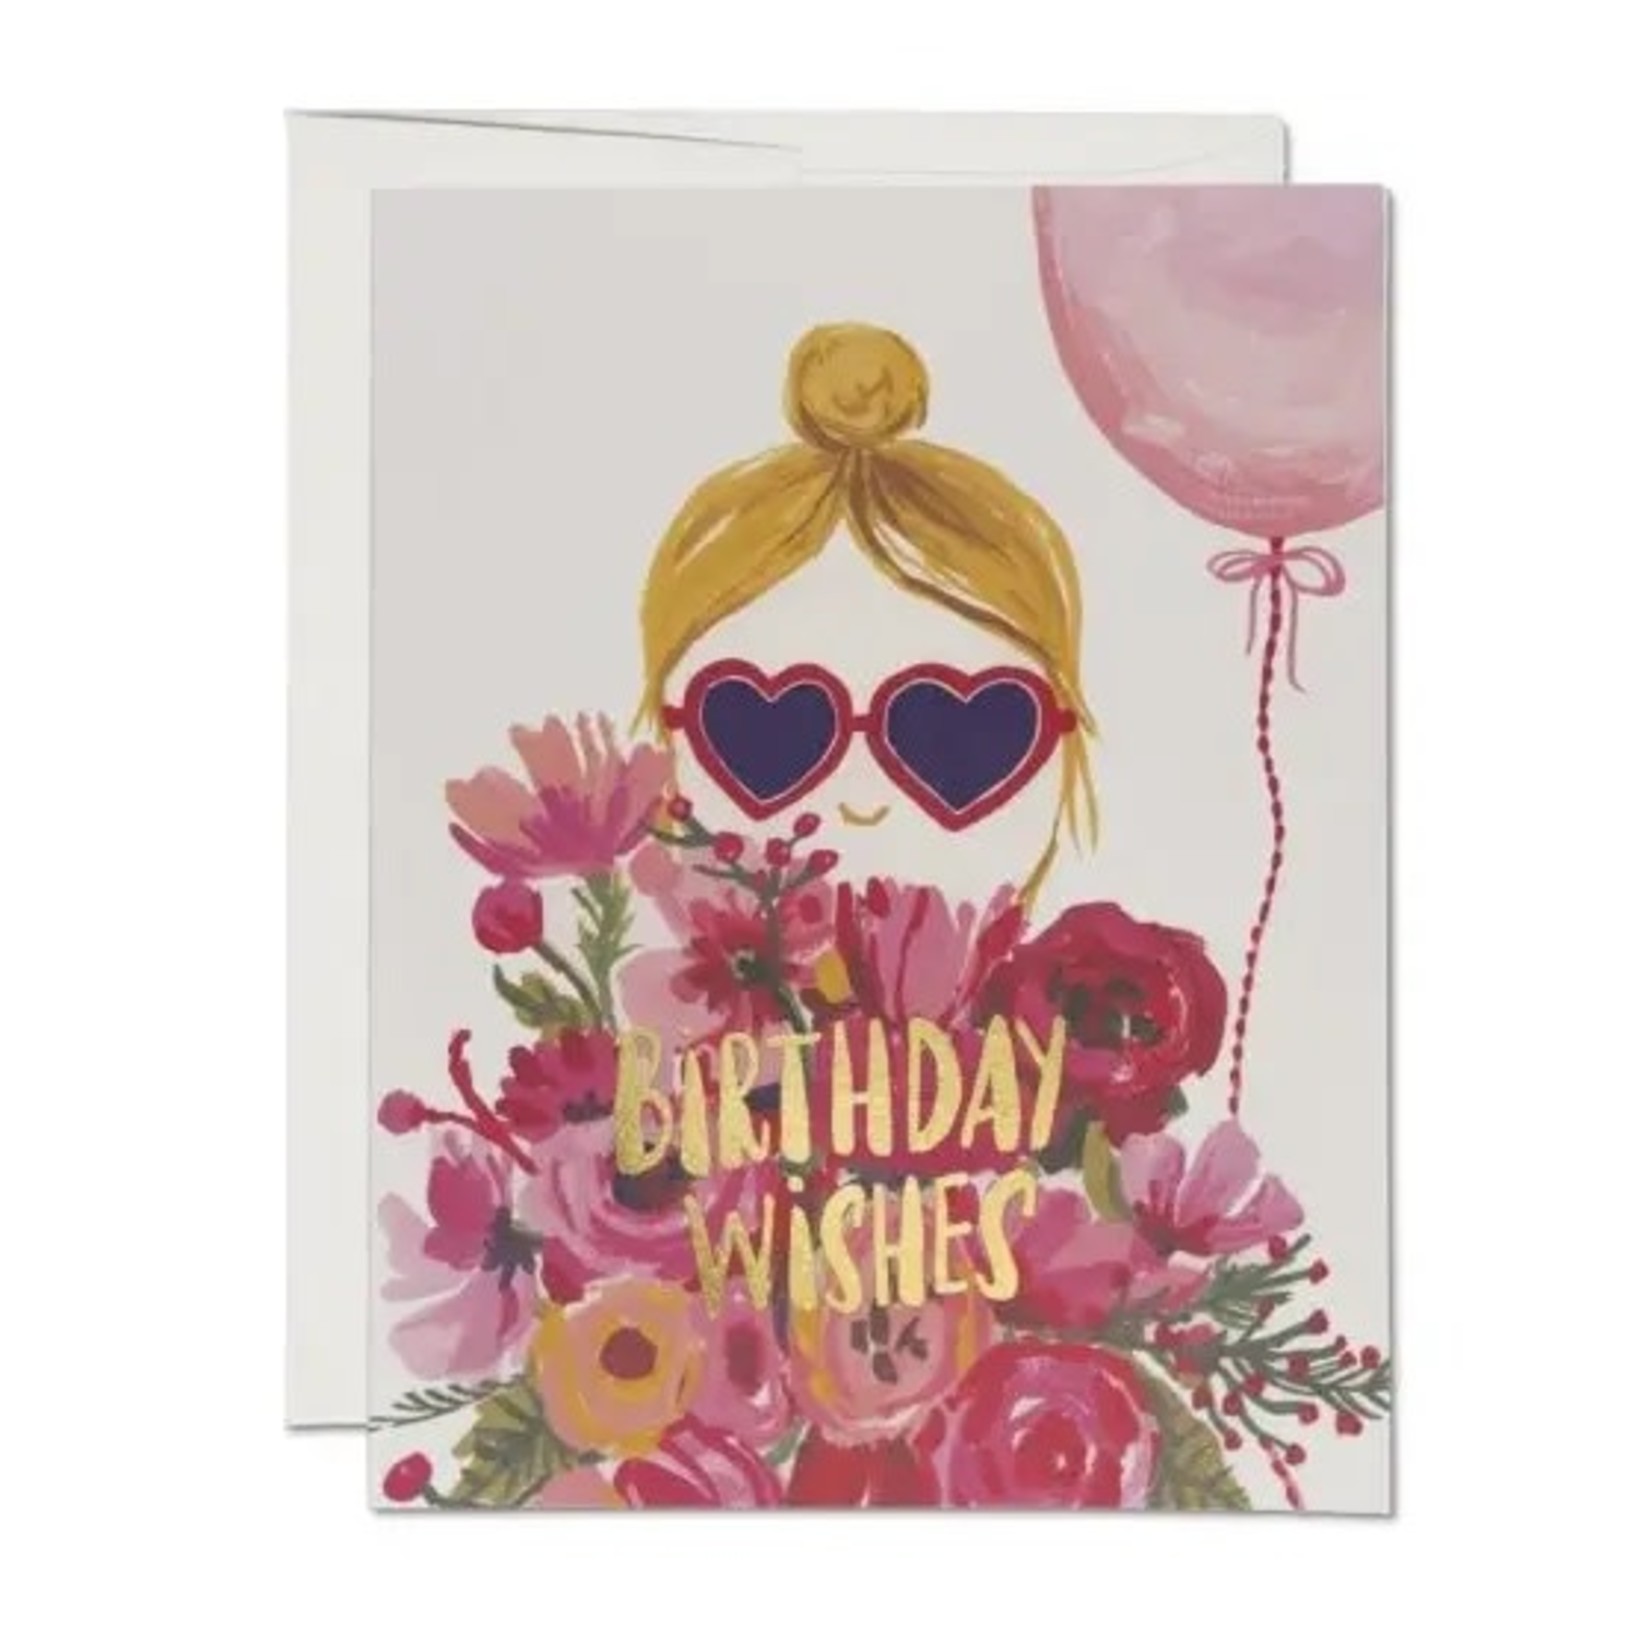 Heart Shaped Glasses - Greeting Card